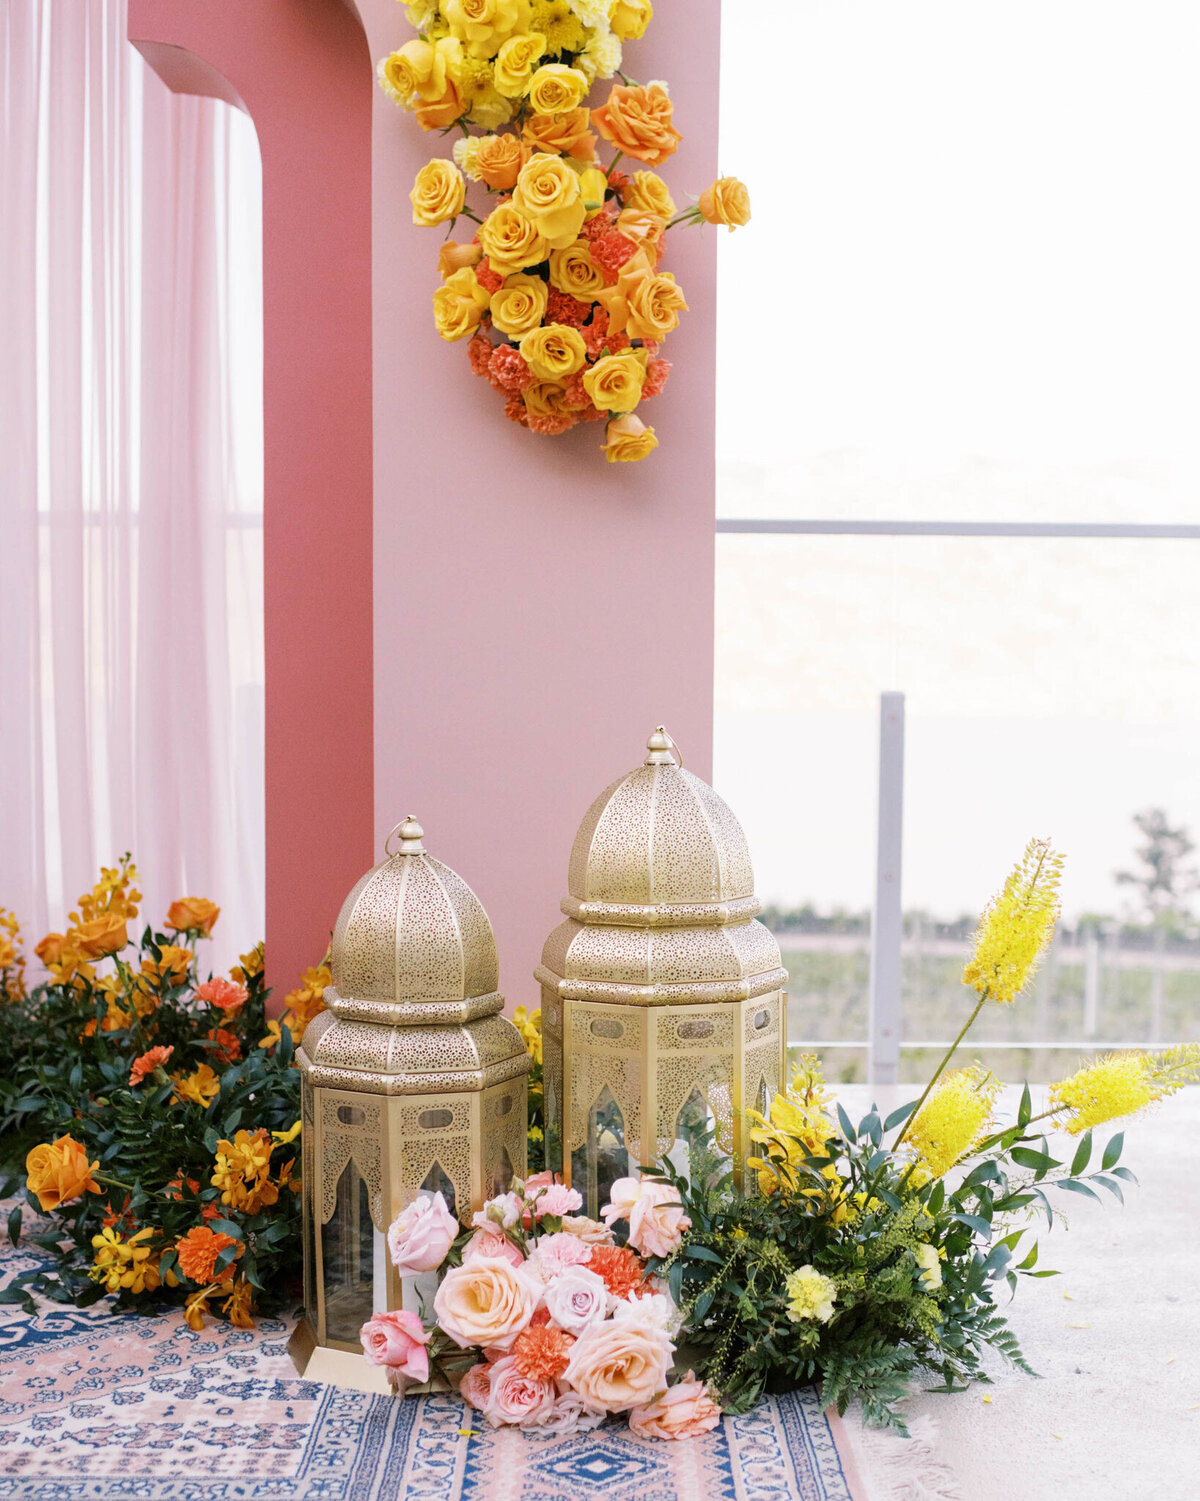 Pink moroccan themed ceremony decor, florals by Valley Bloom Co, bright and airy wedding florals based in Kelowna, BC. Featured on the Brontë Bride Vendor Guide.